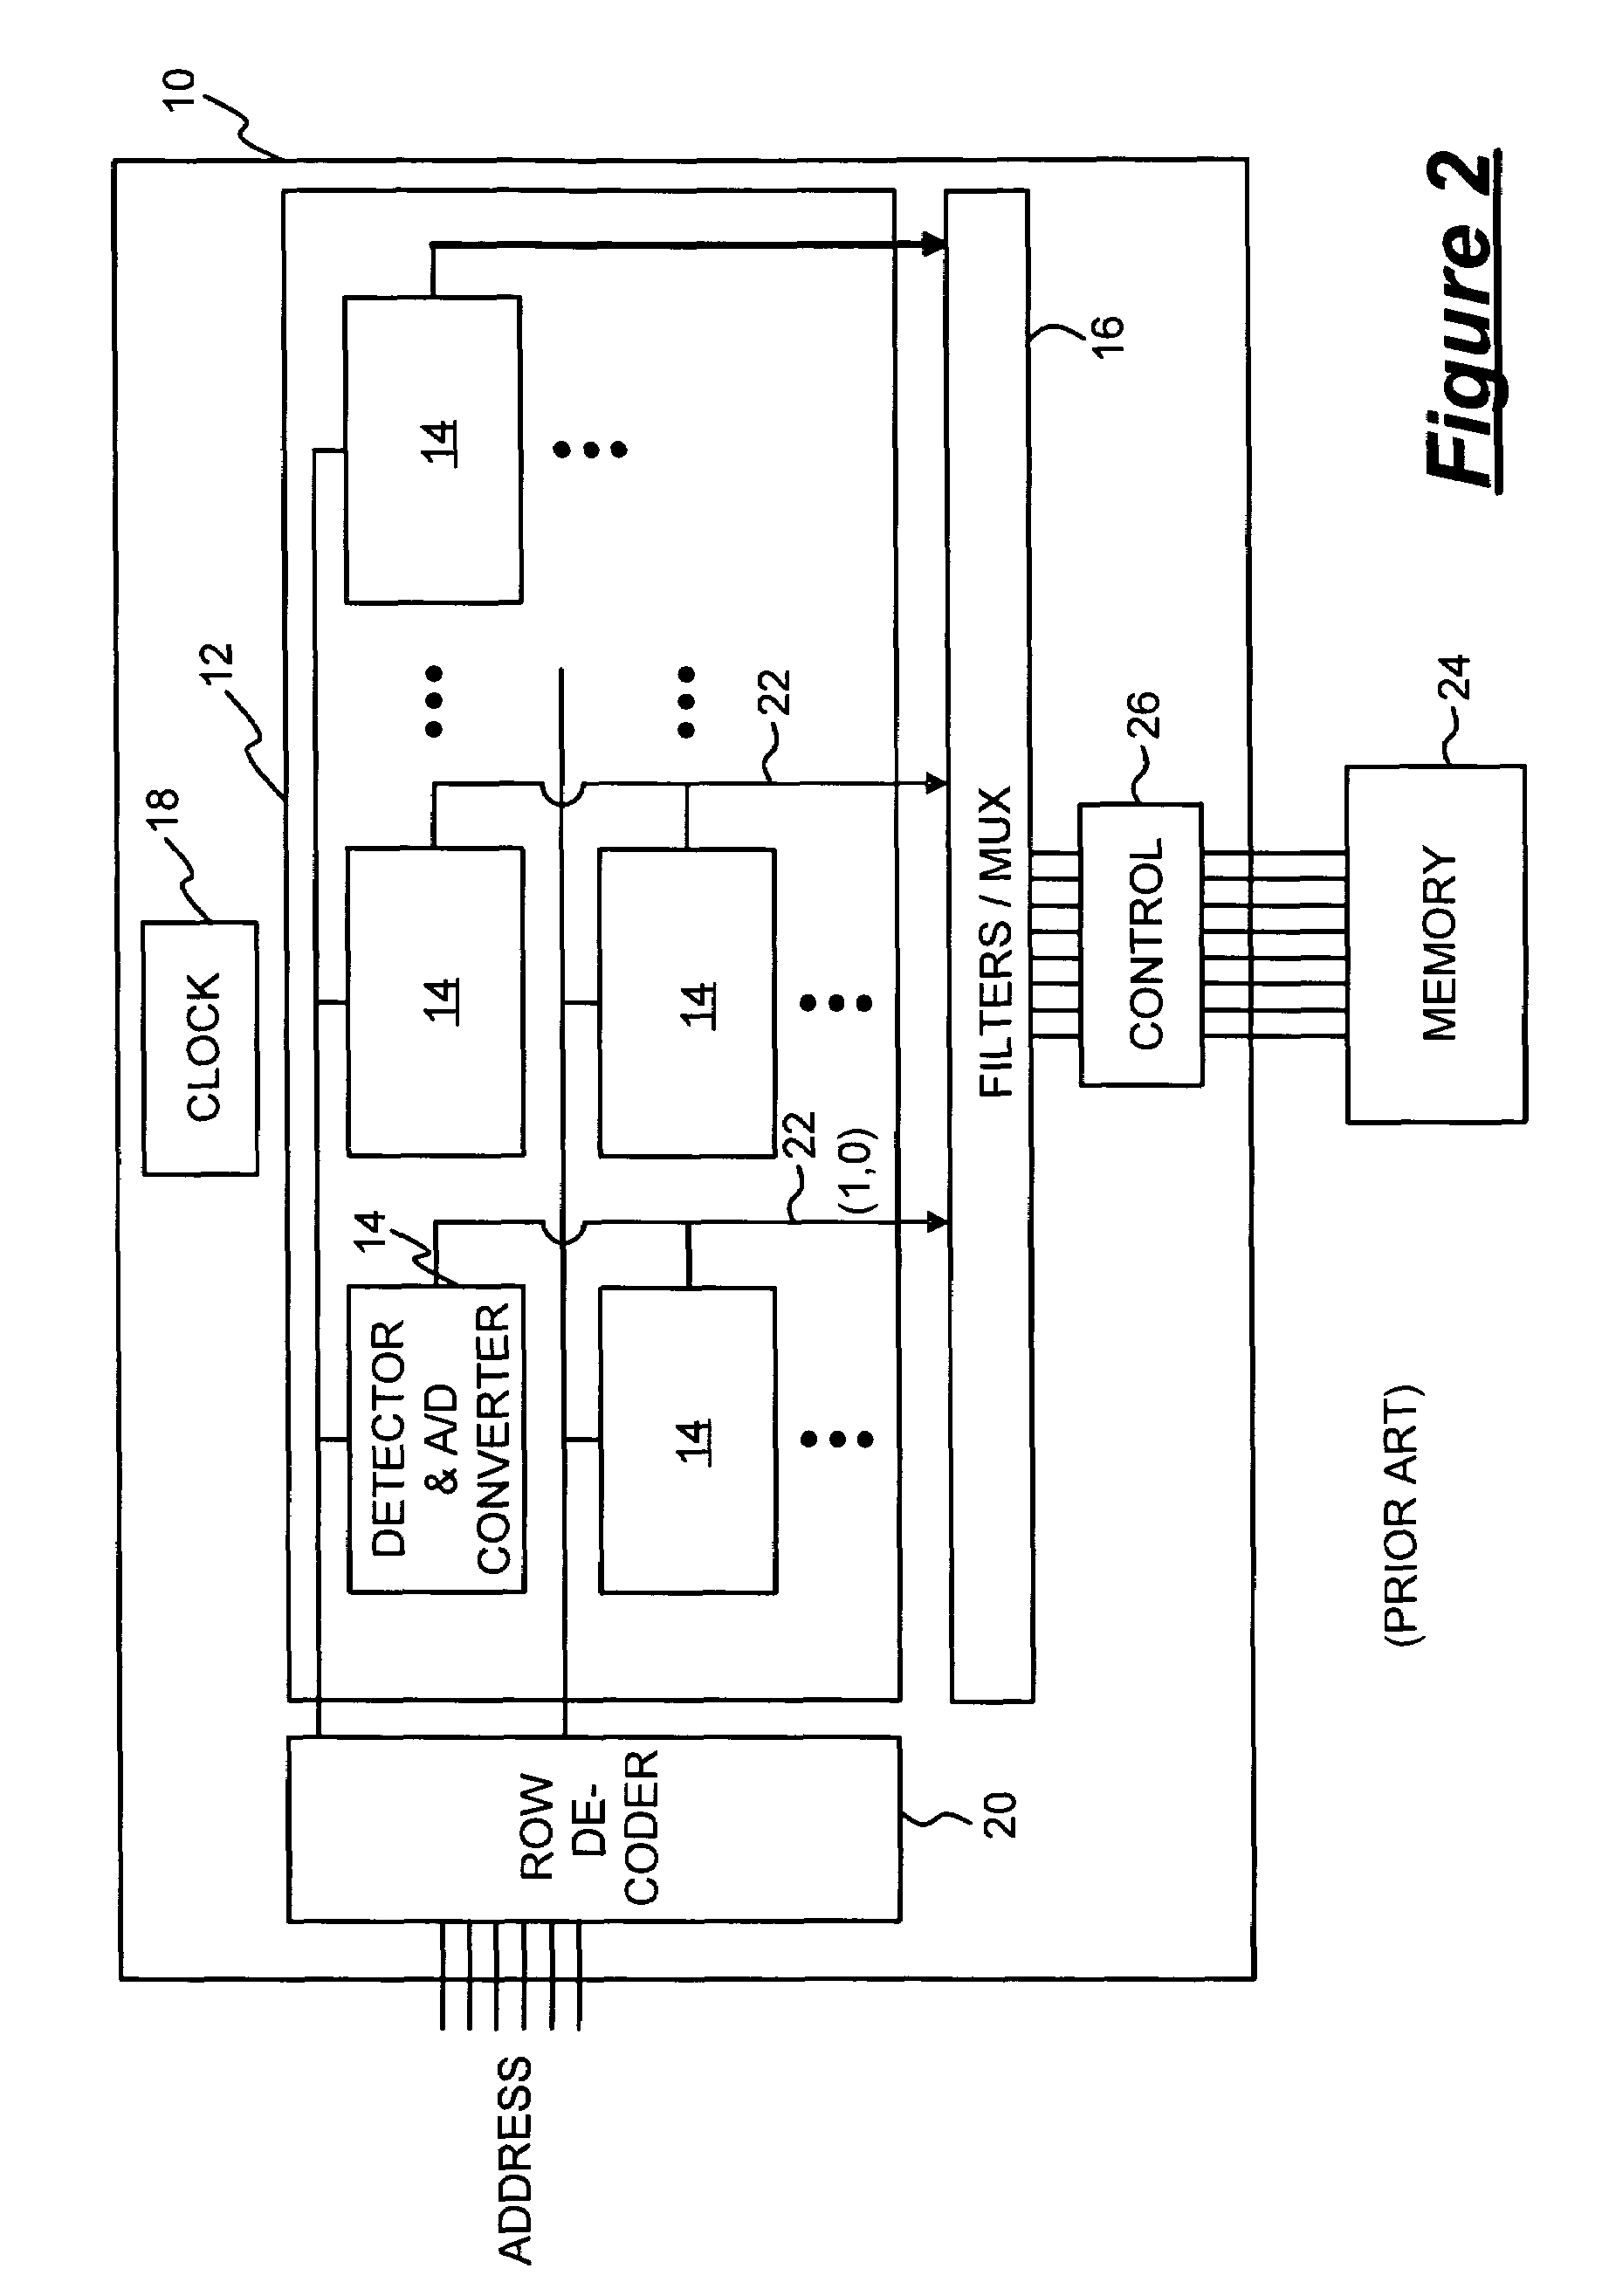 Image processor with noise reduction circuit